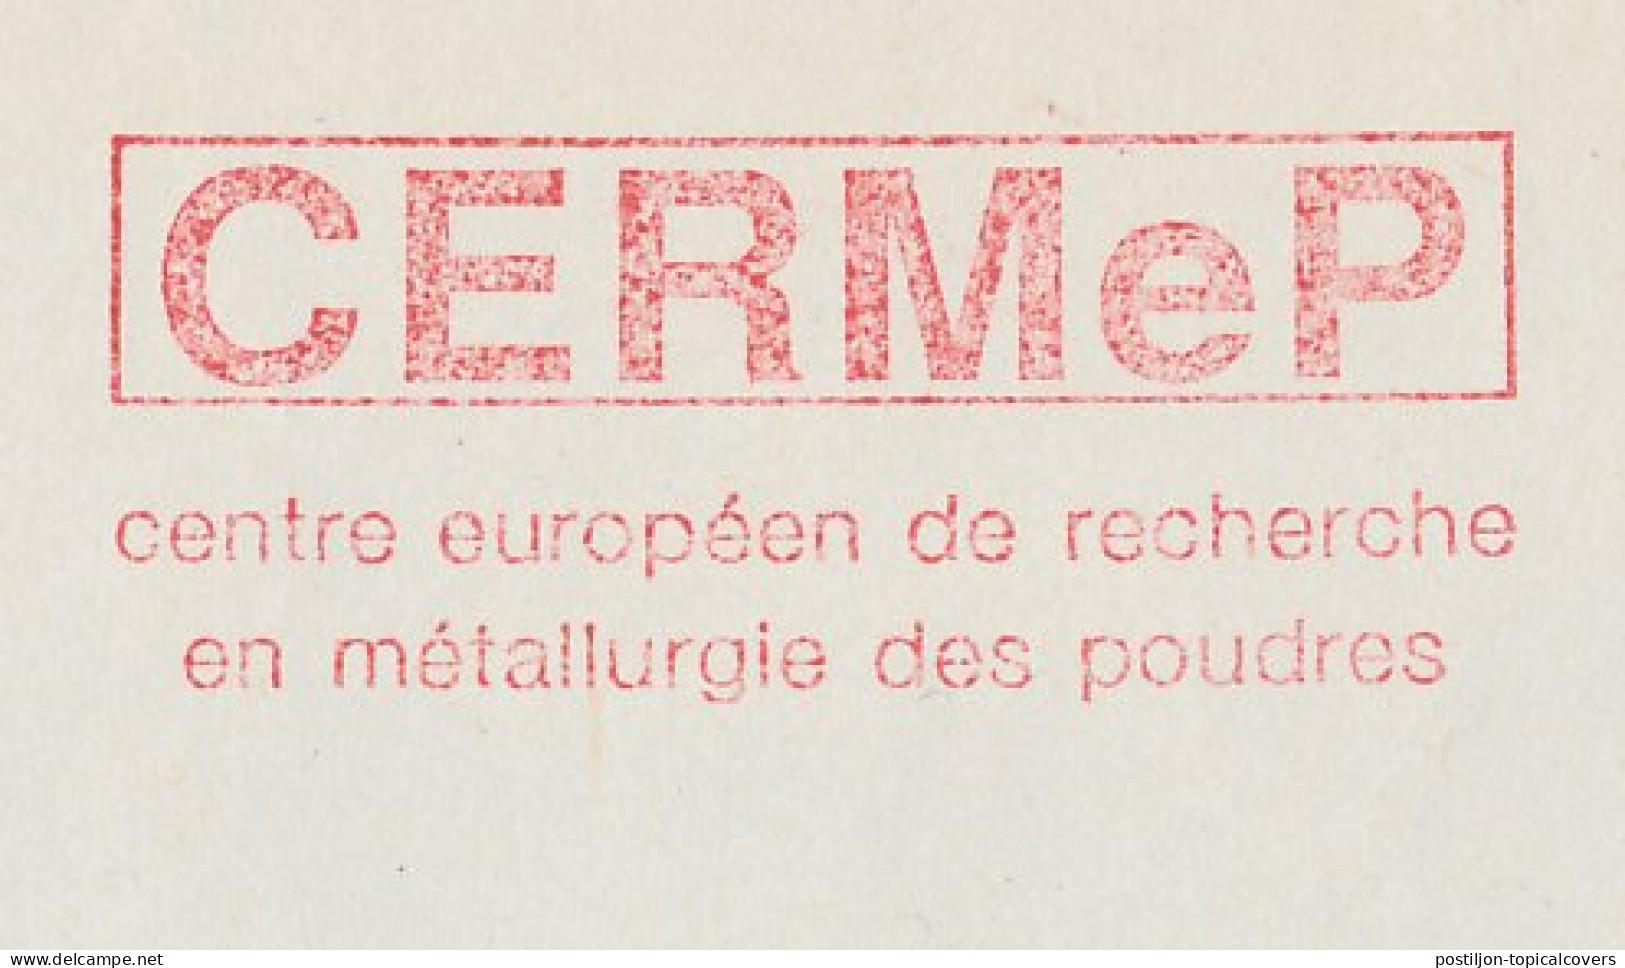 Meter Cover France 1991 CERMeP - European Research Center In Powder Metallurgy - Other & Unclassified